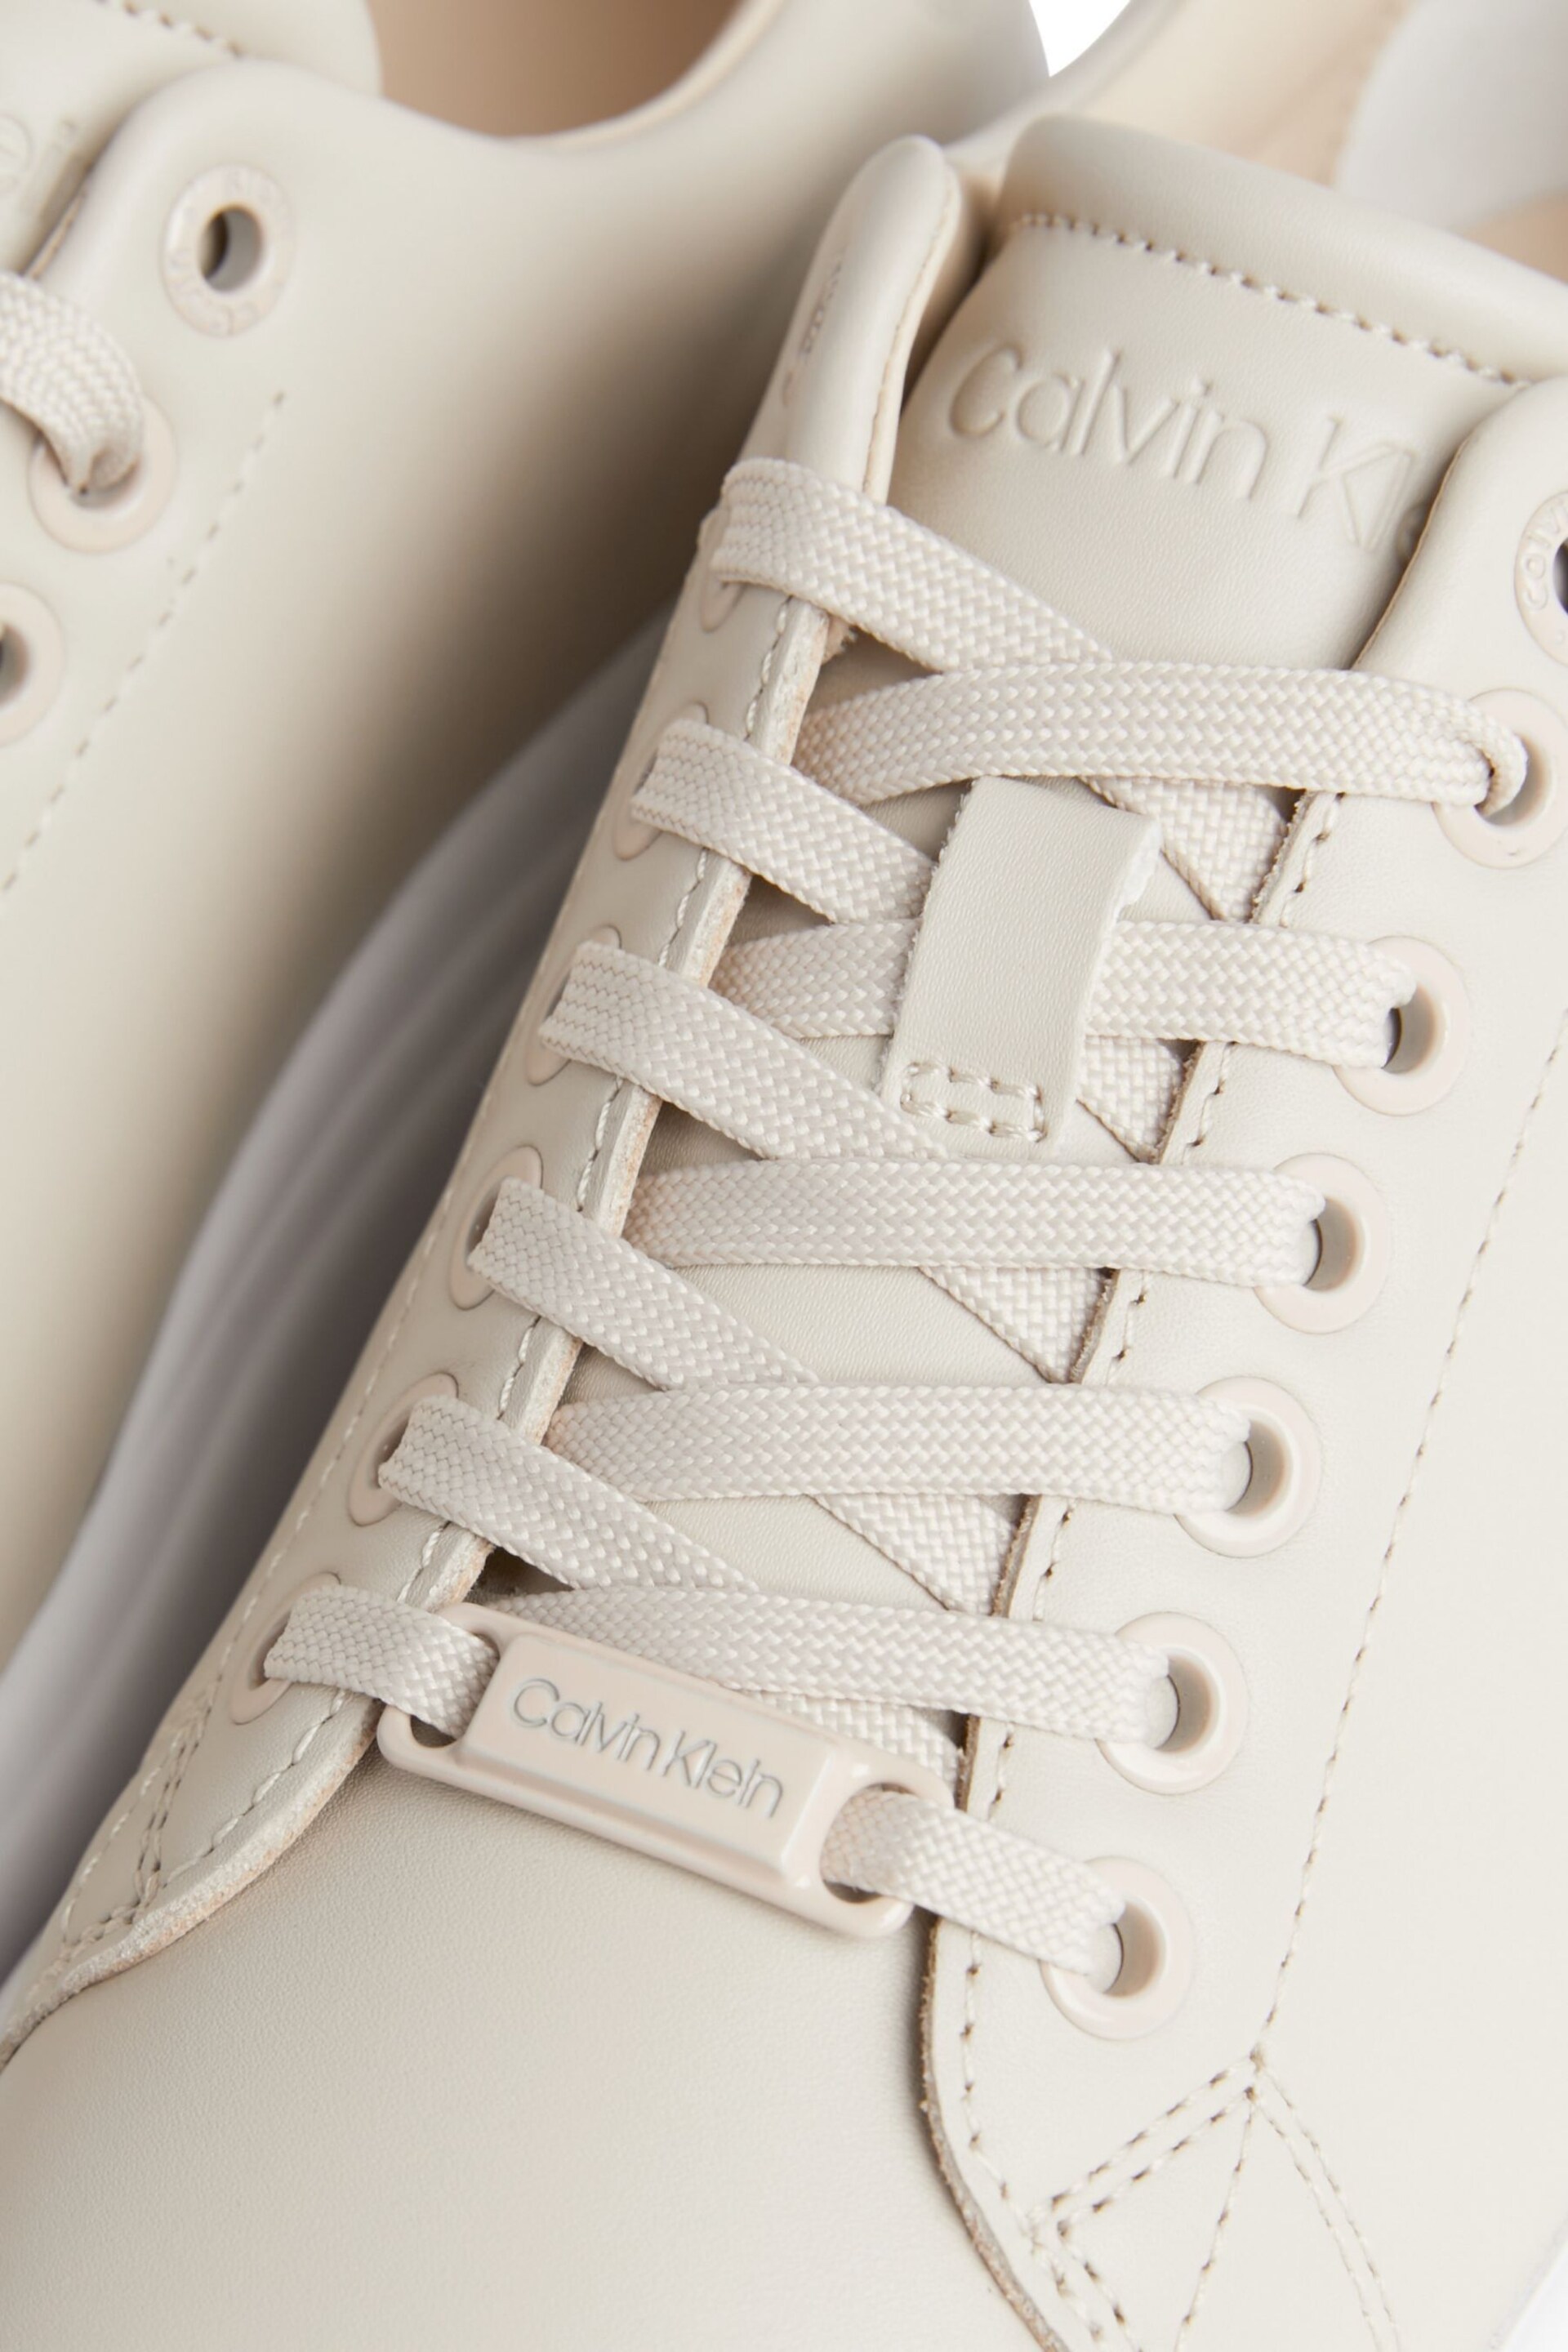 Calvin Klein White Cupsole Lace-Up Leather Sneakers - Image 4 of 7